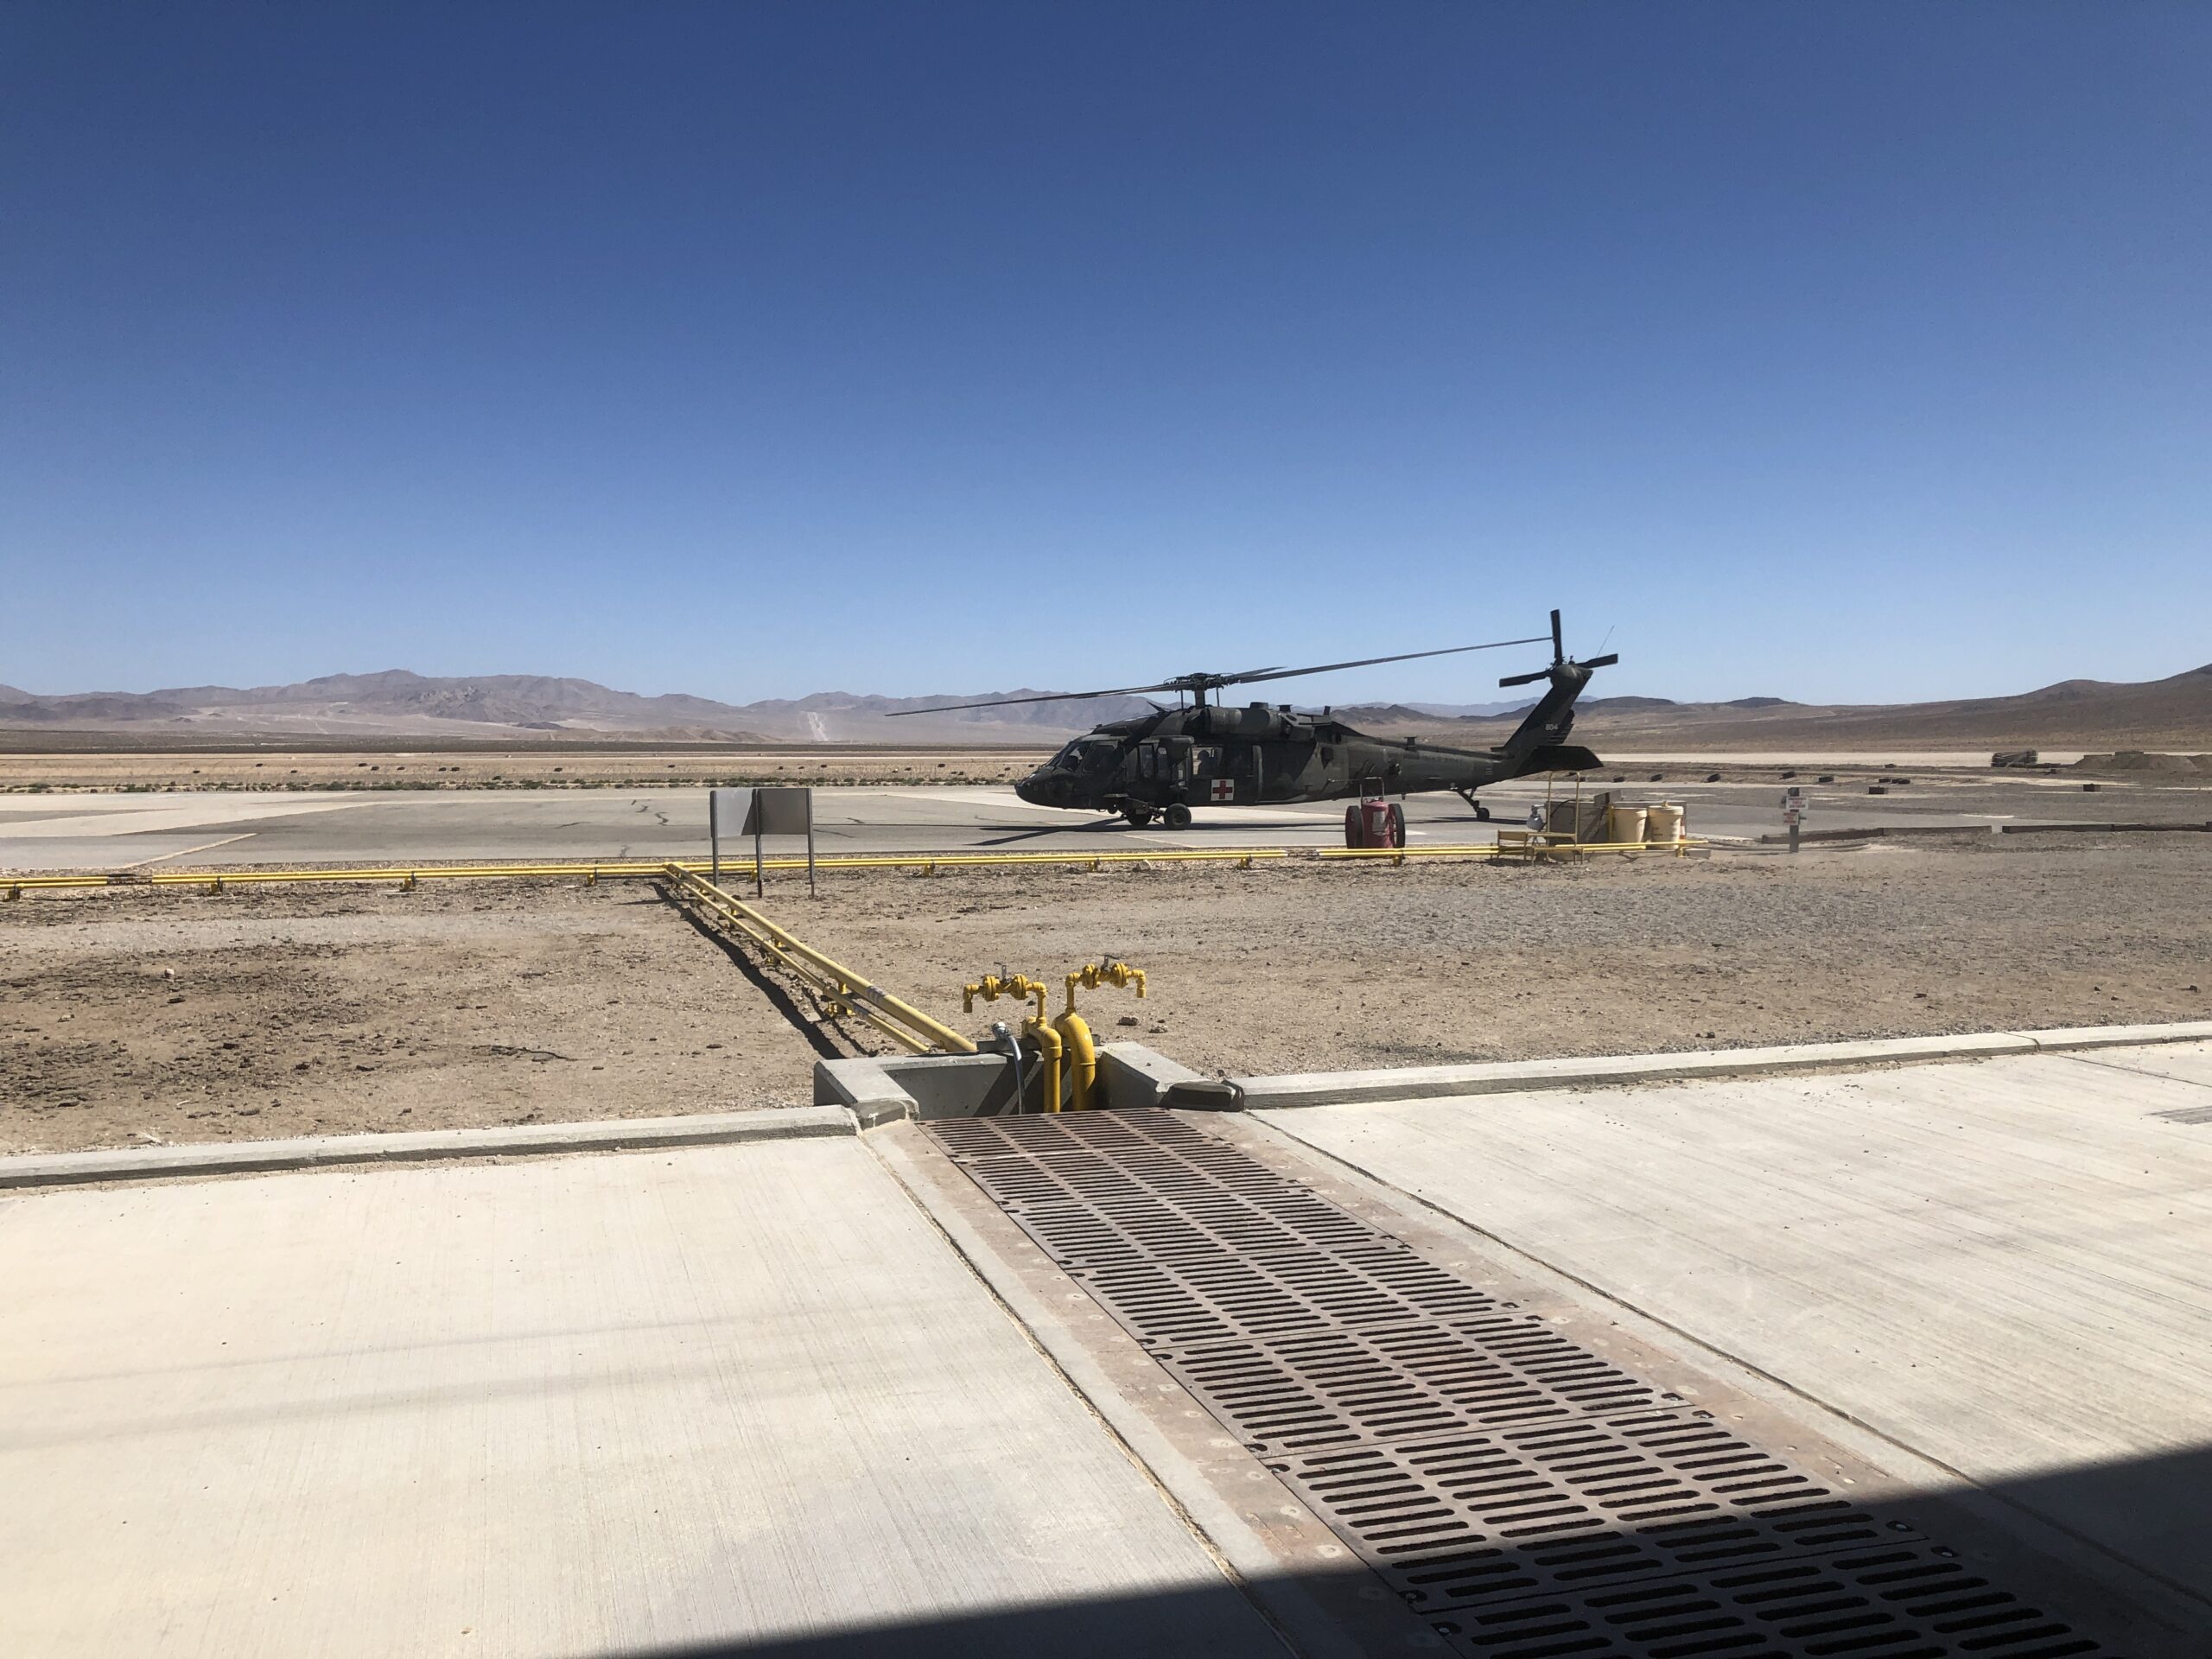 Fort Irwin – Fueling System Repairs